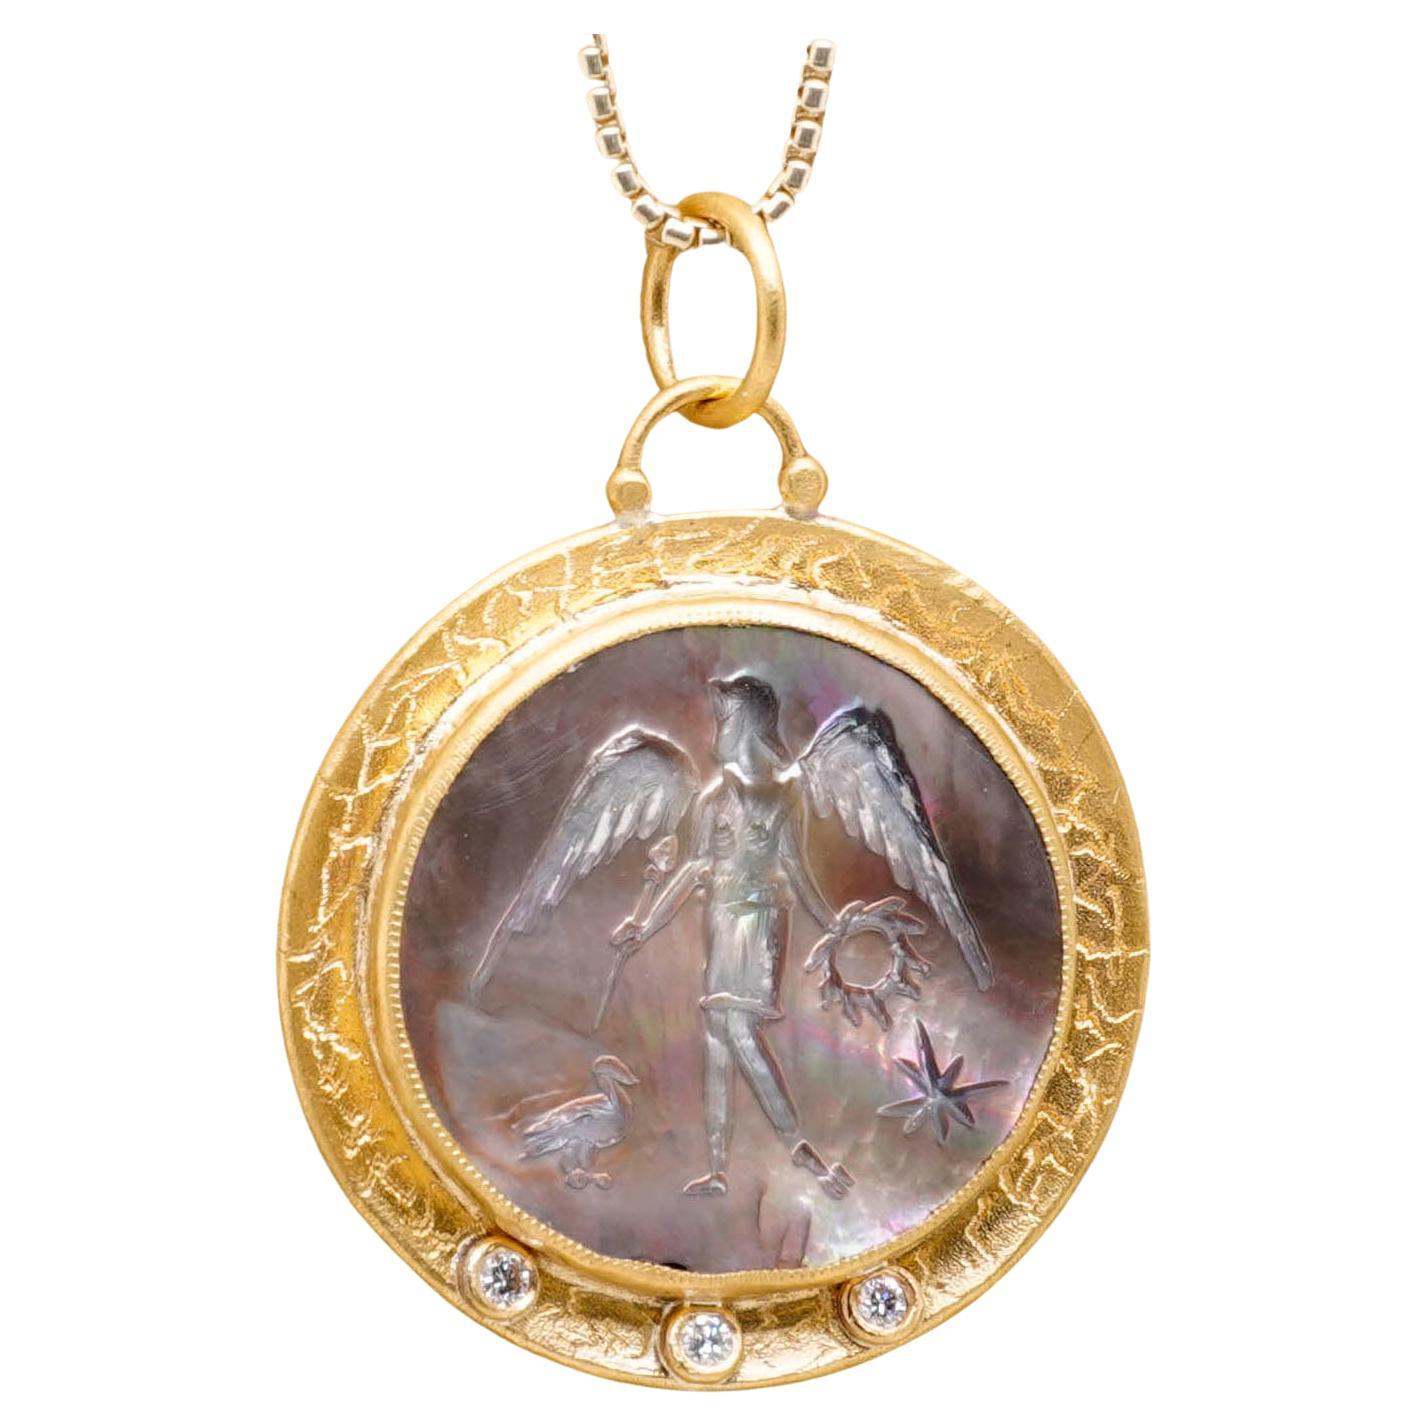 Nike, Winged Goddess of Victory, Carved in Mother of Pearl, Framed Pendant Necklace with Three Diamonds, 24kt Gold and Silver by Prehistoric Works of Istanbul, Turkey. These pendants look great alone or paired with other coin pendants or with